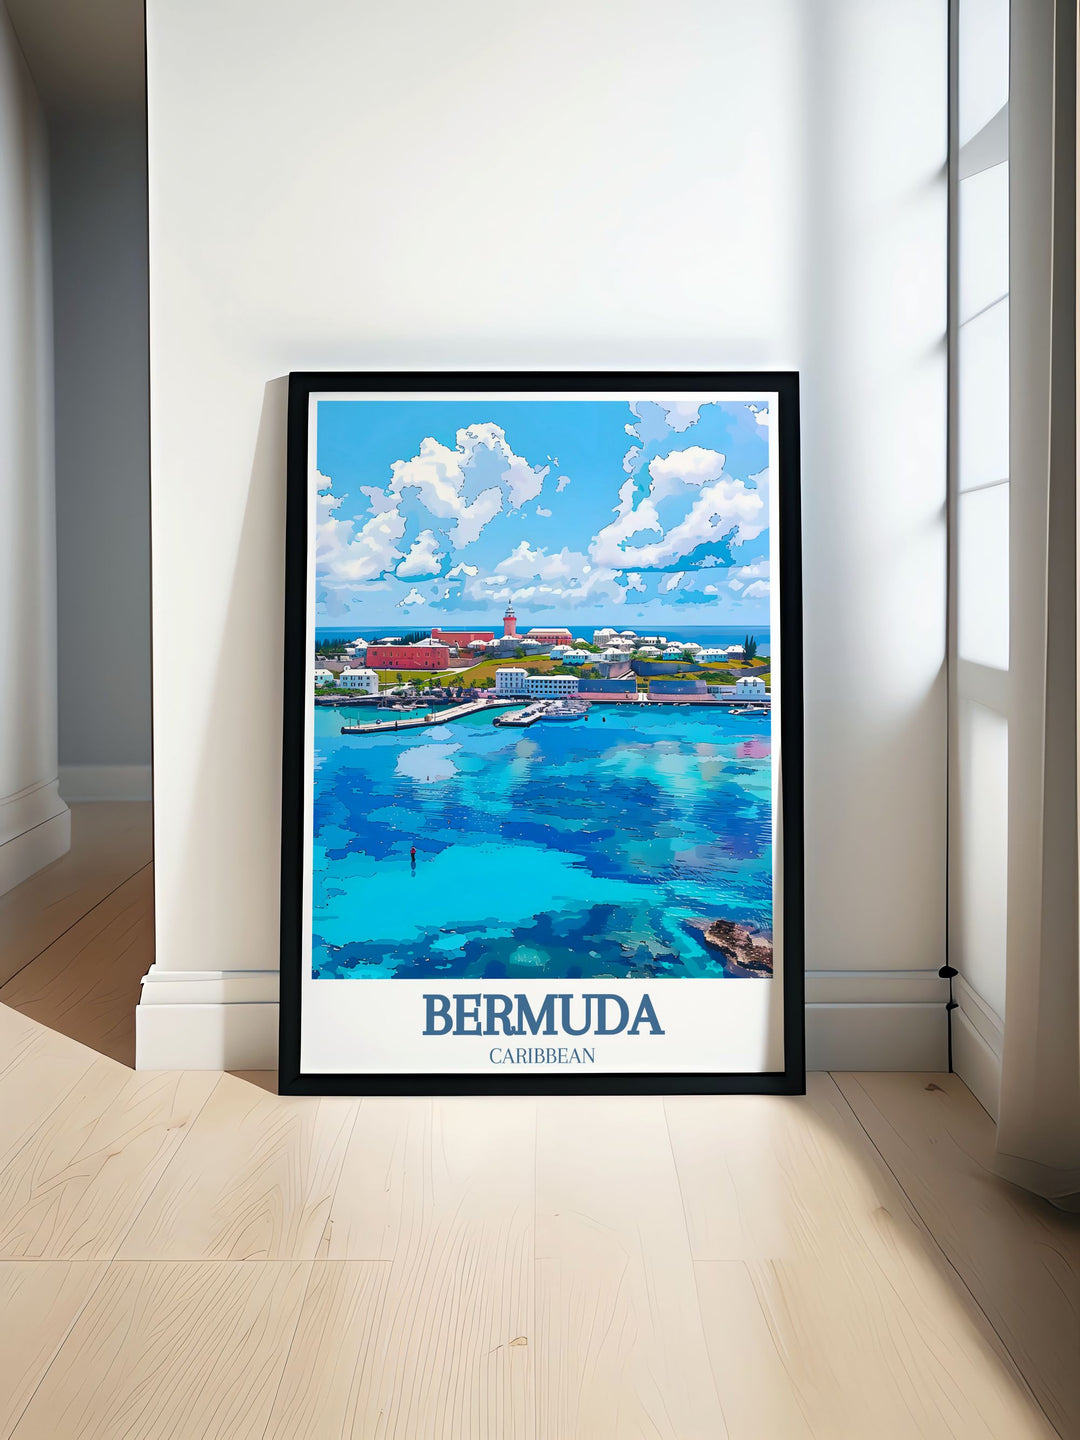 Beautiful Bermuda poster featuring the historic St. Georges Town and the iconic St. Peters Church, showcasing the islands rich heritage and charm. Perfect for adding a touch of historical elegance to your home decor.